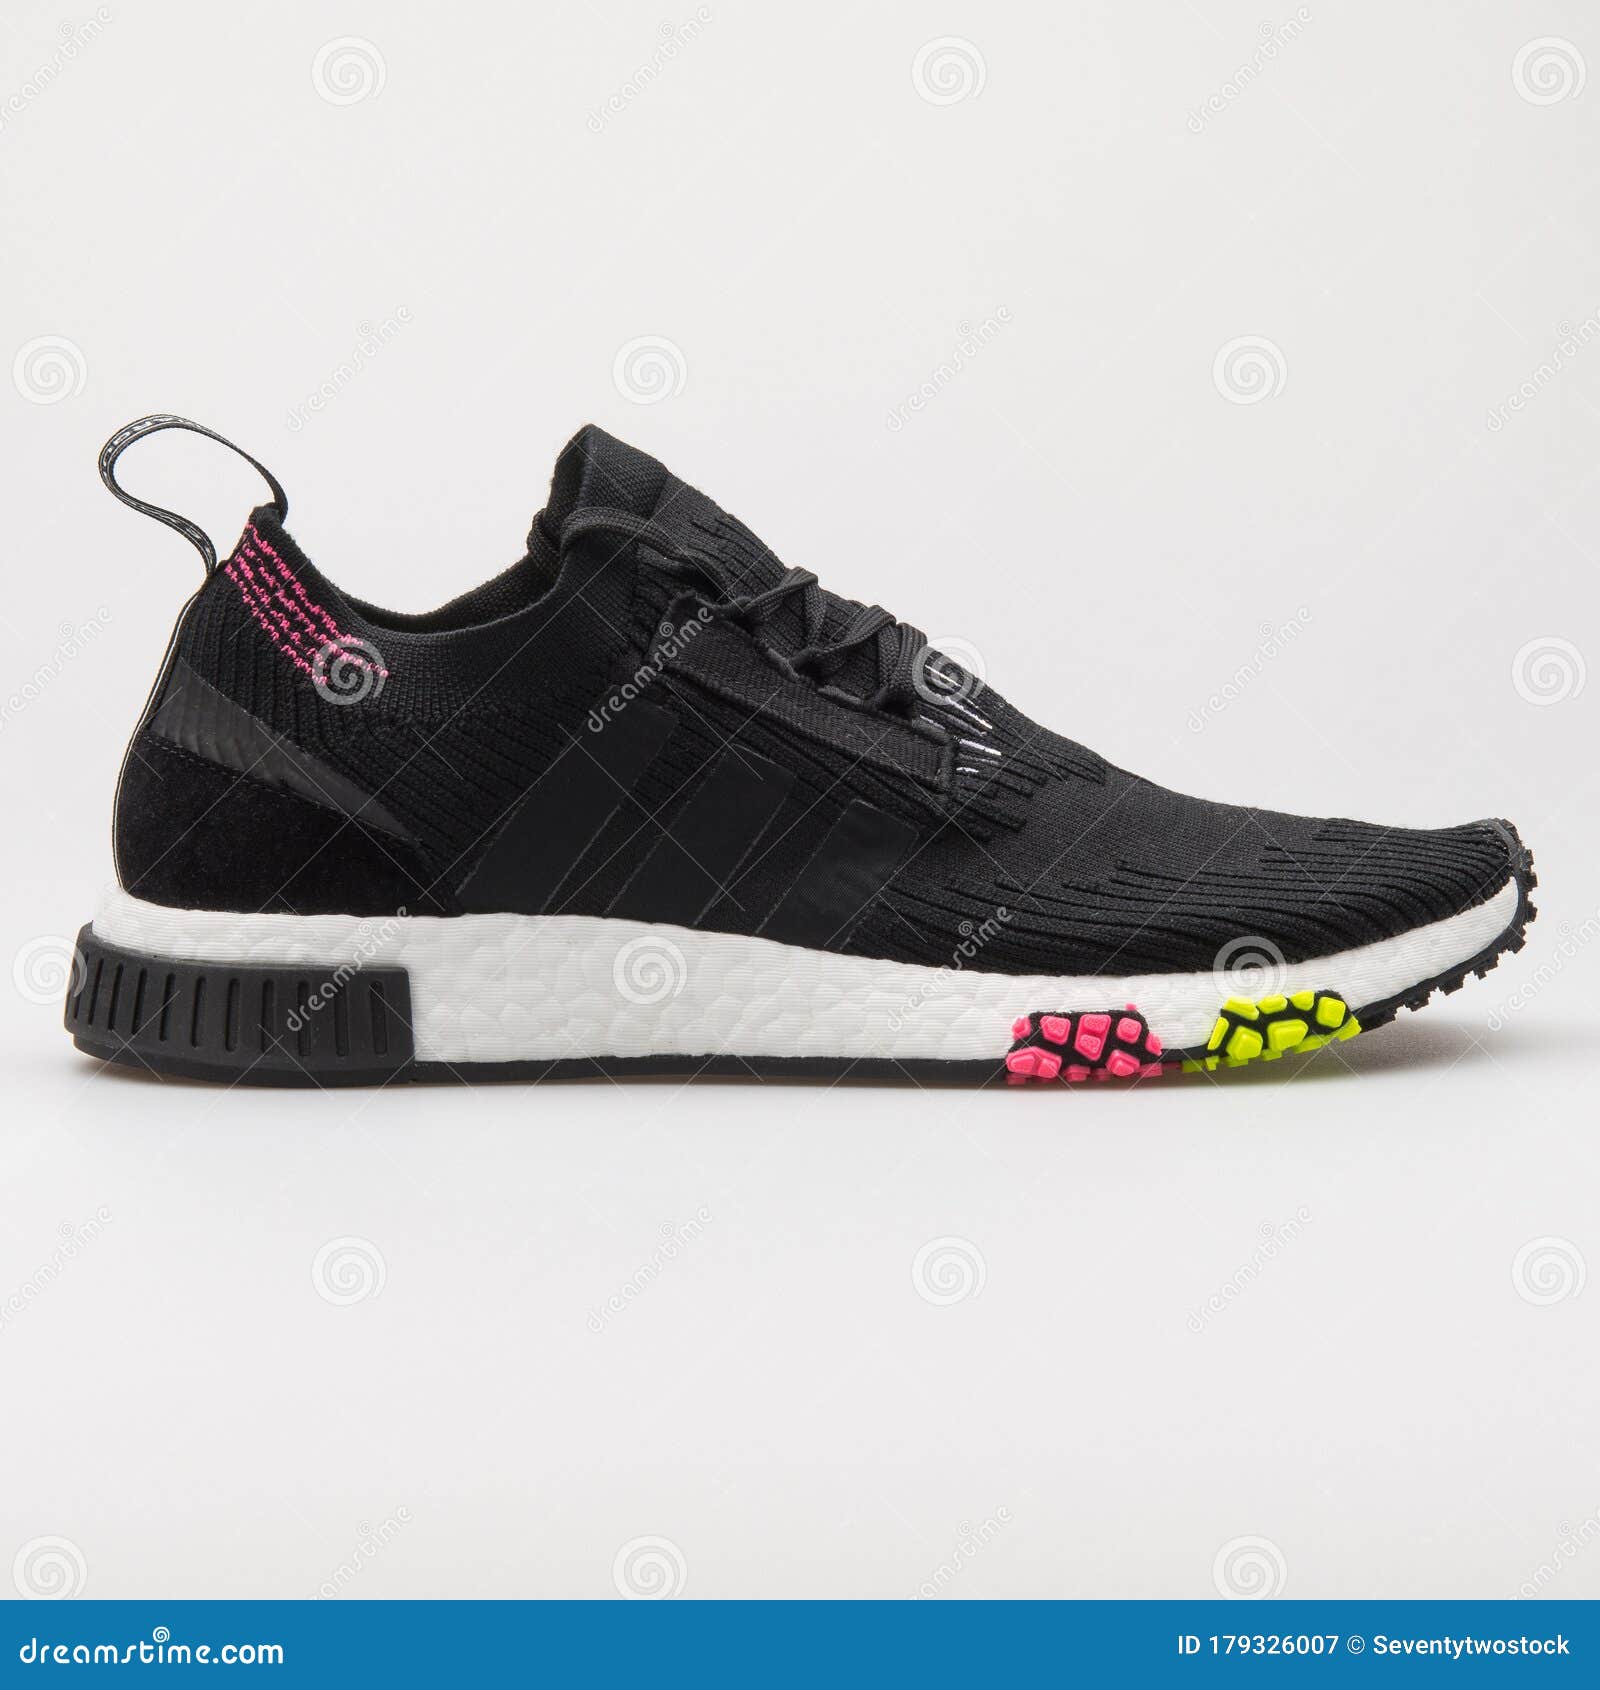 Adidas NMD Racer PK Primeknit Core Black, Pink and Yellow Sneaker Editorial Photography - Image of racer: 179326007